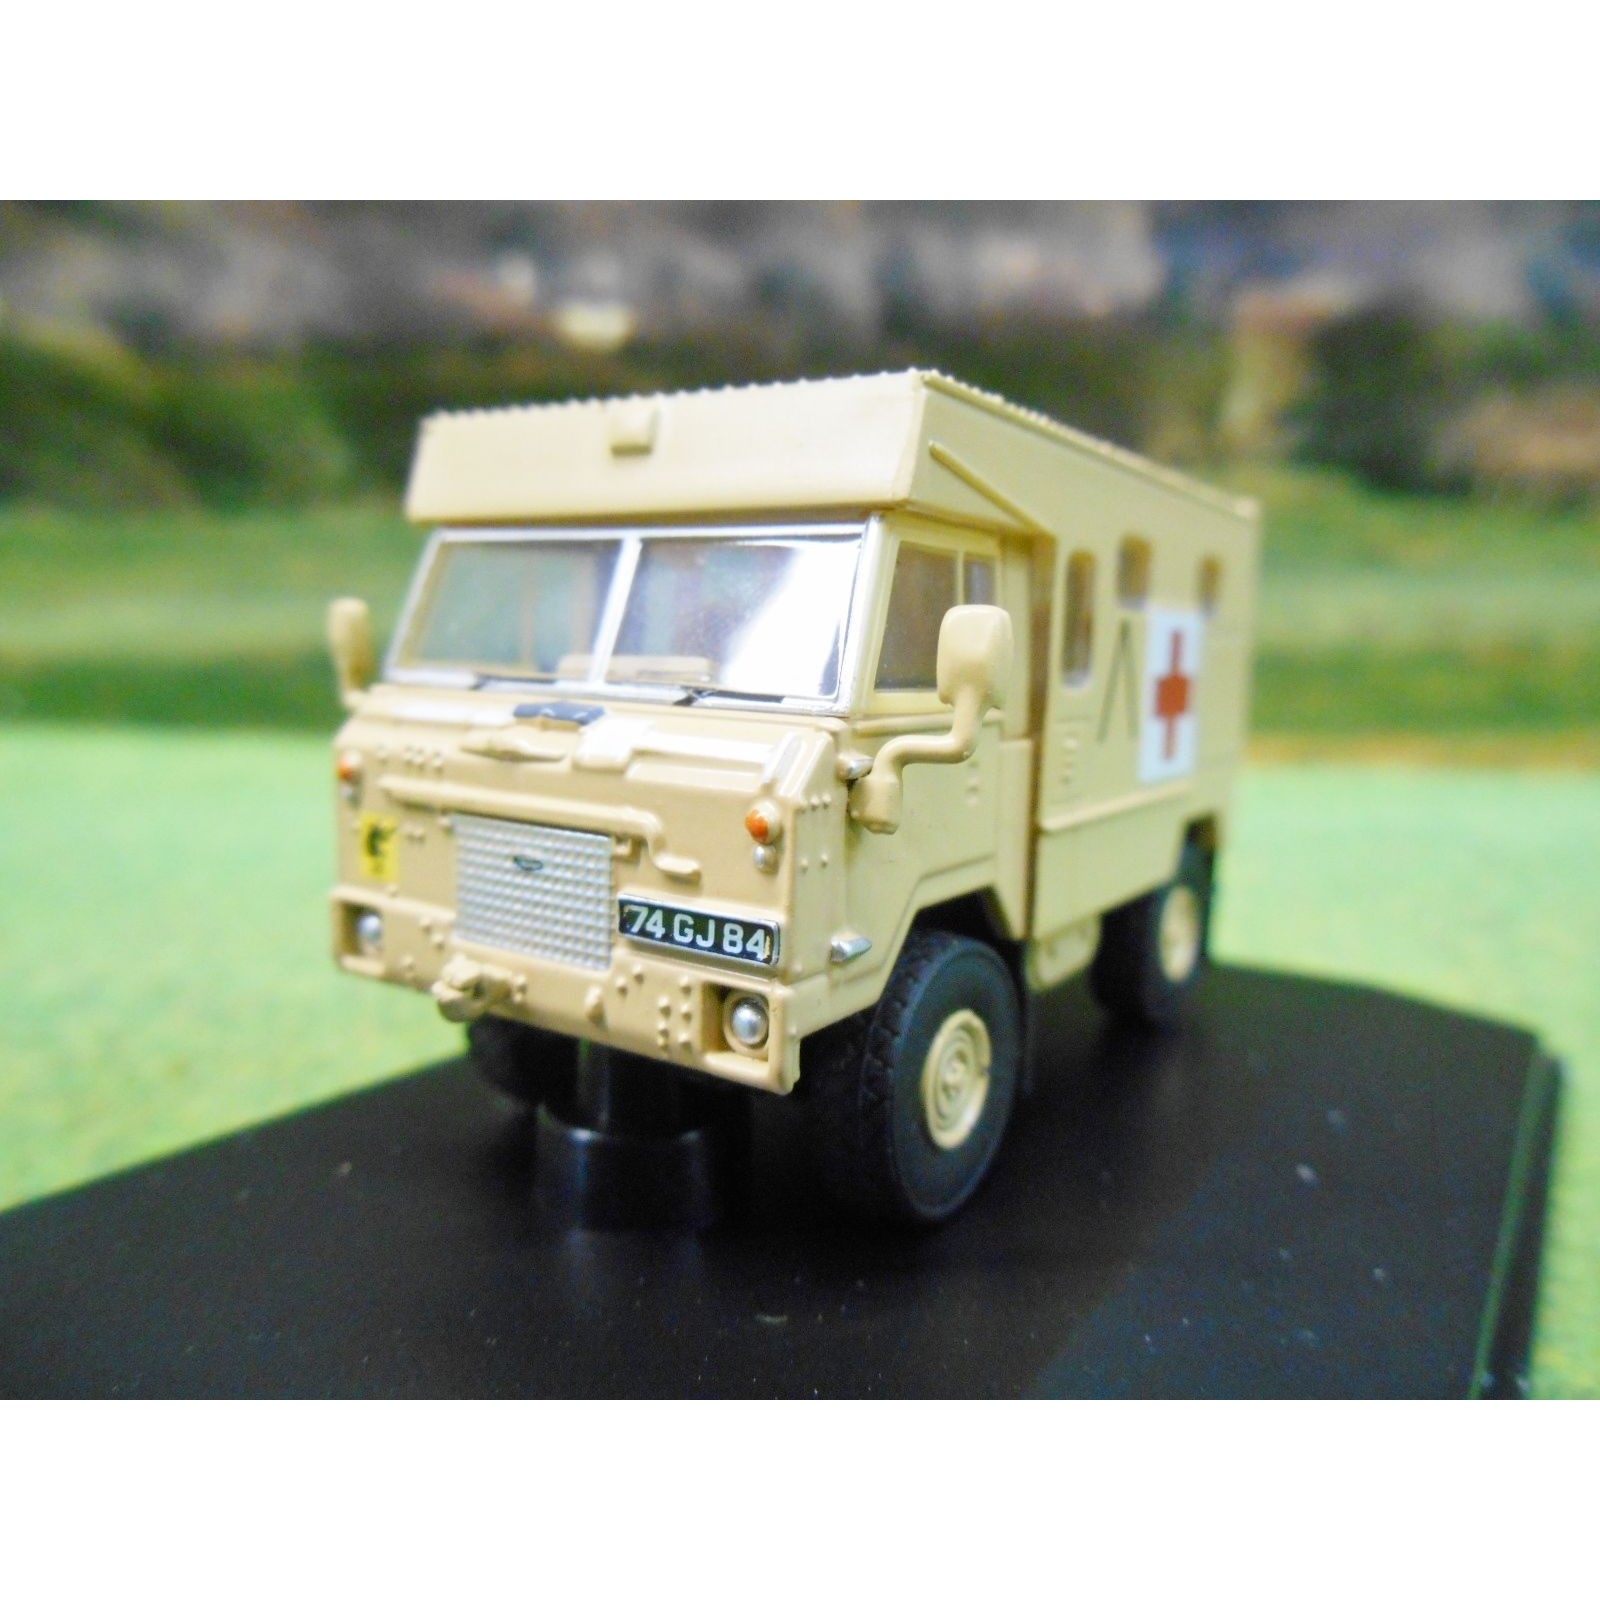 Details about   76LRFCG003 Oxford Diecast Land Rover 101FC 1/76 Model Britsh Army 